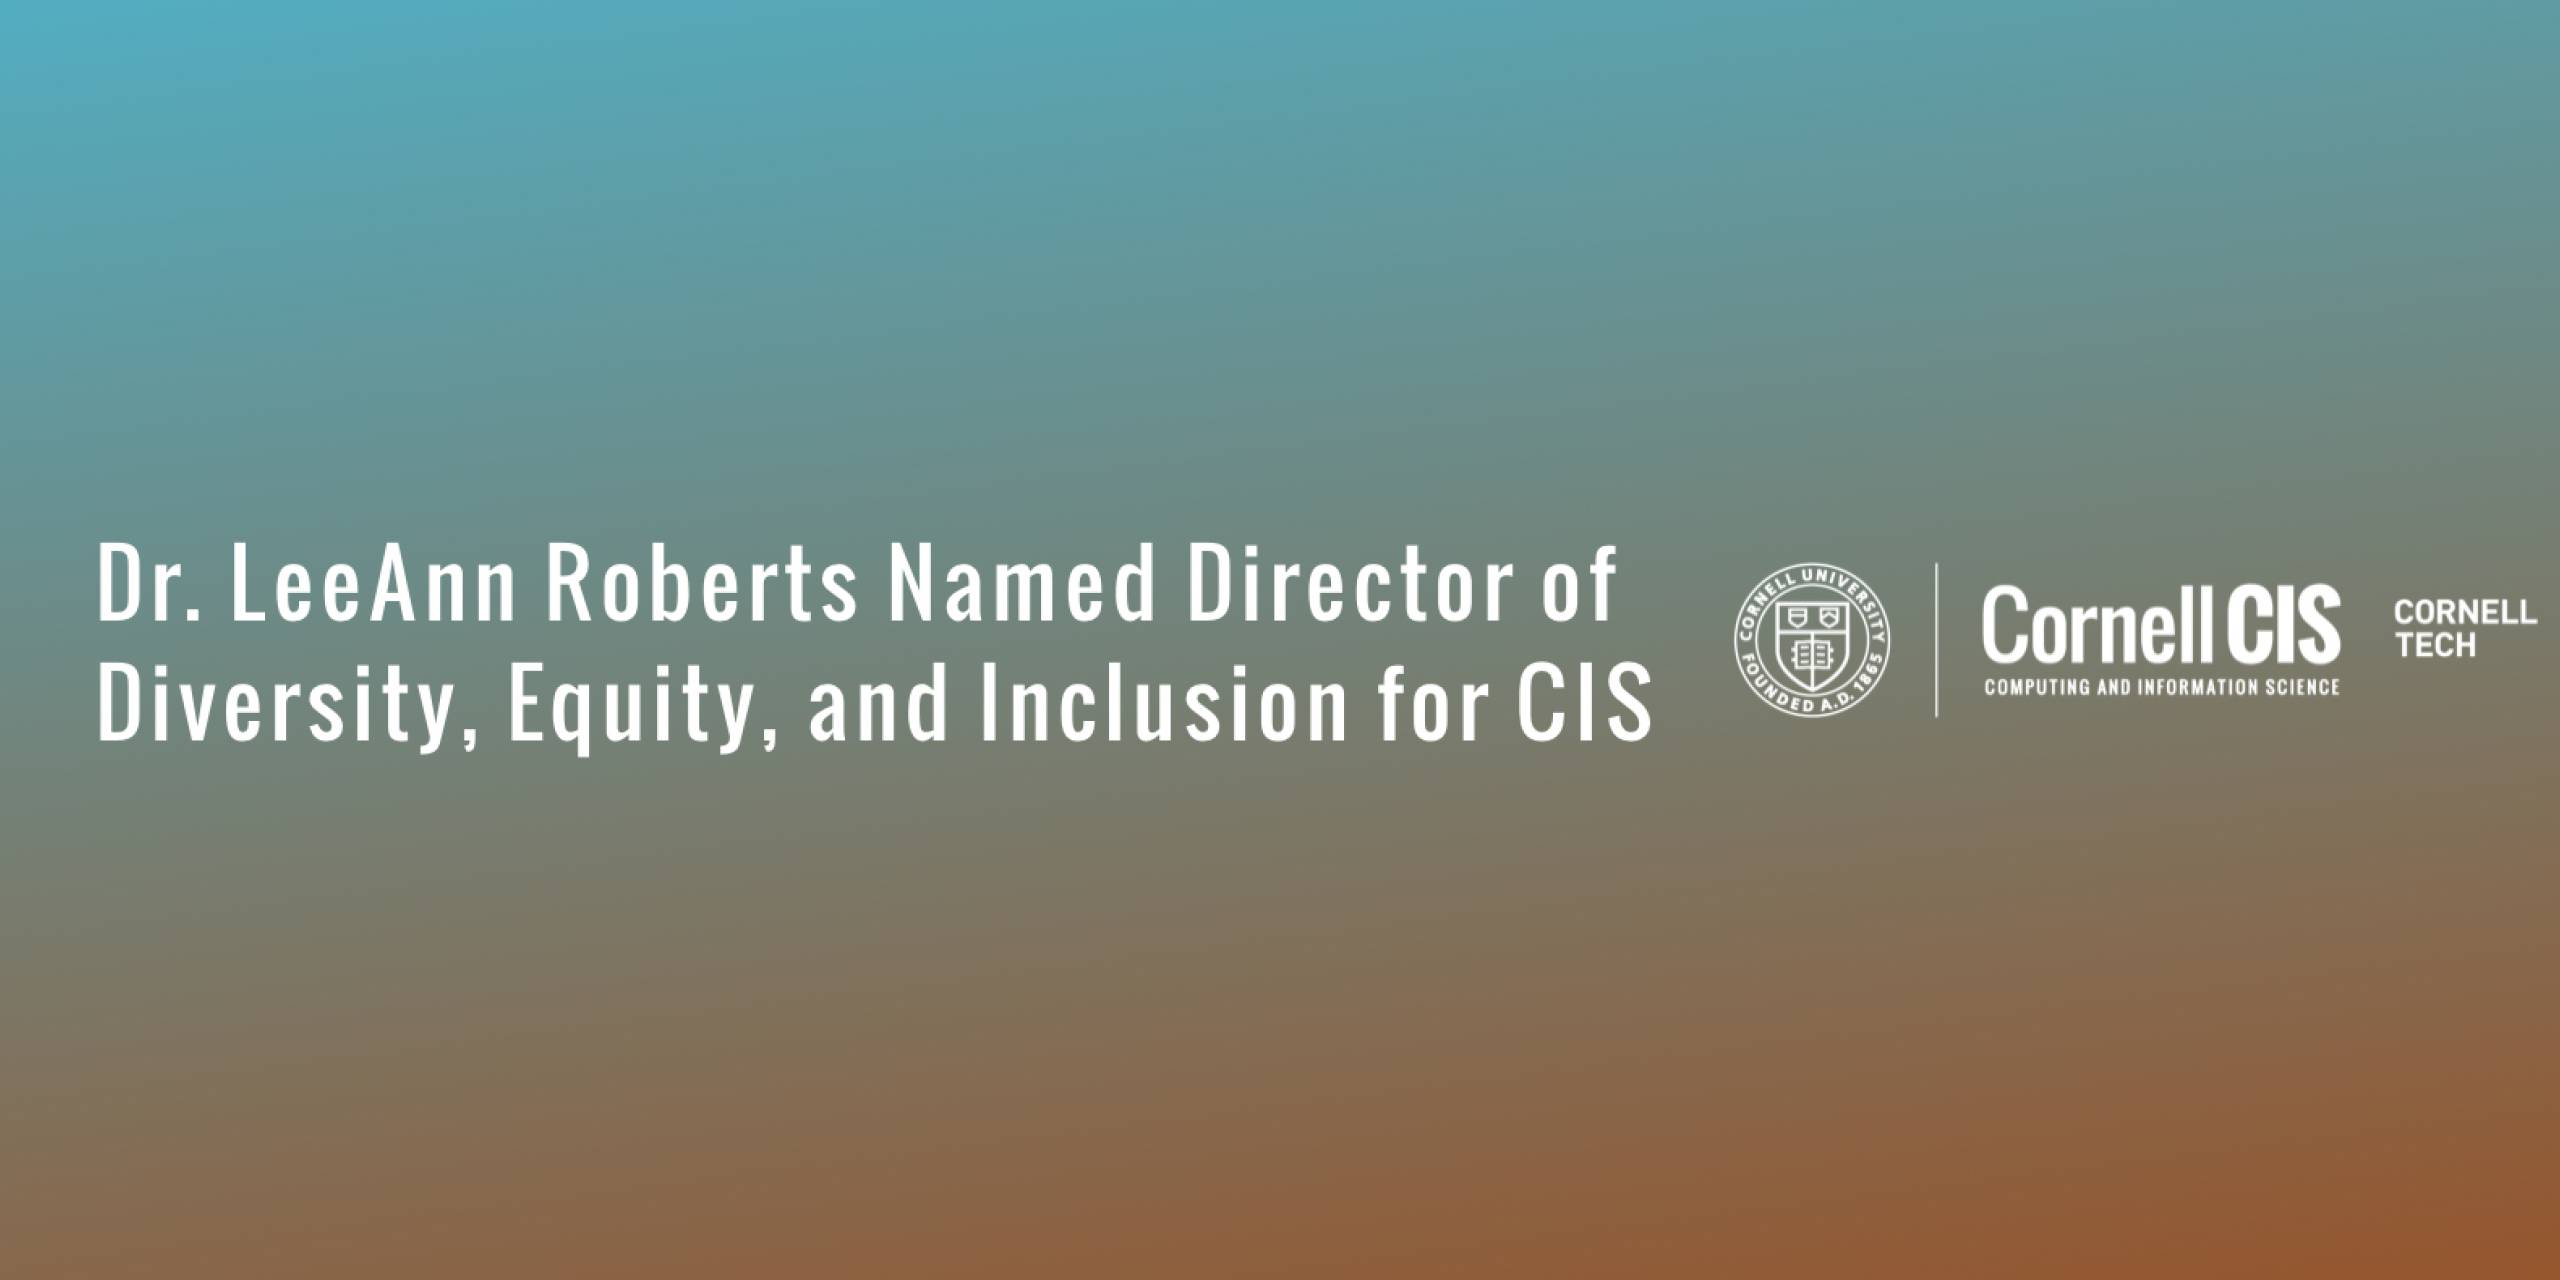 Dr. LeeAnn Roberts named Director of Diversity, Equity, and Inclusion for CIS